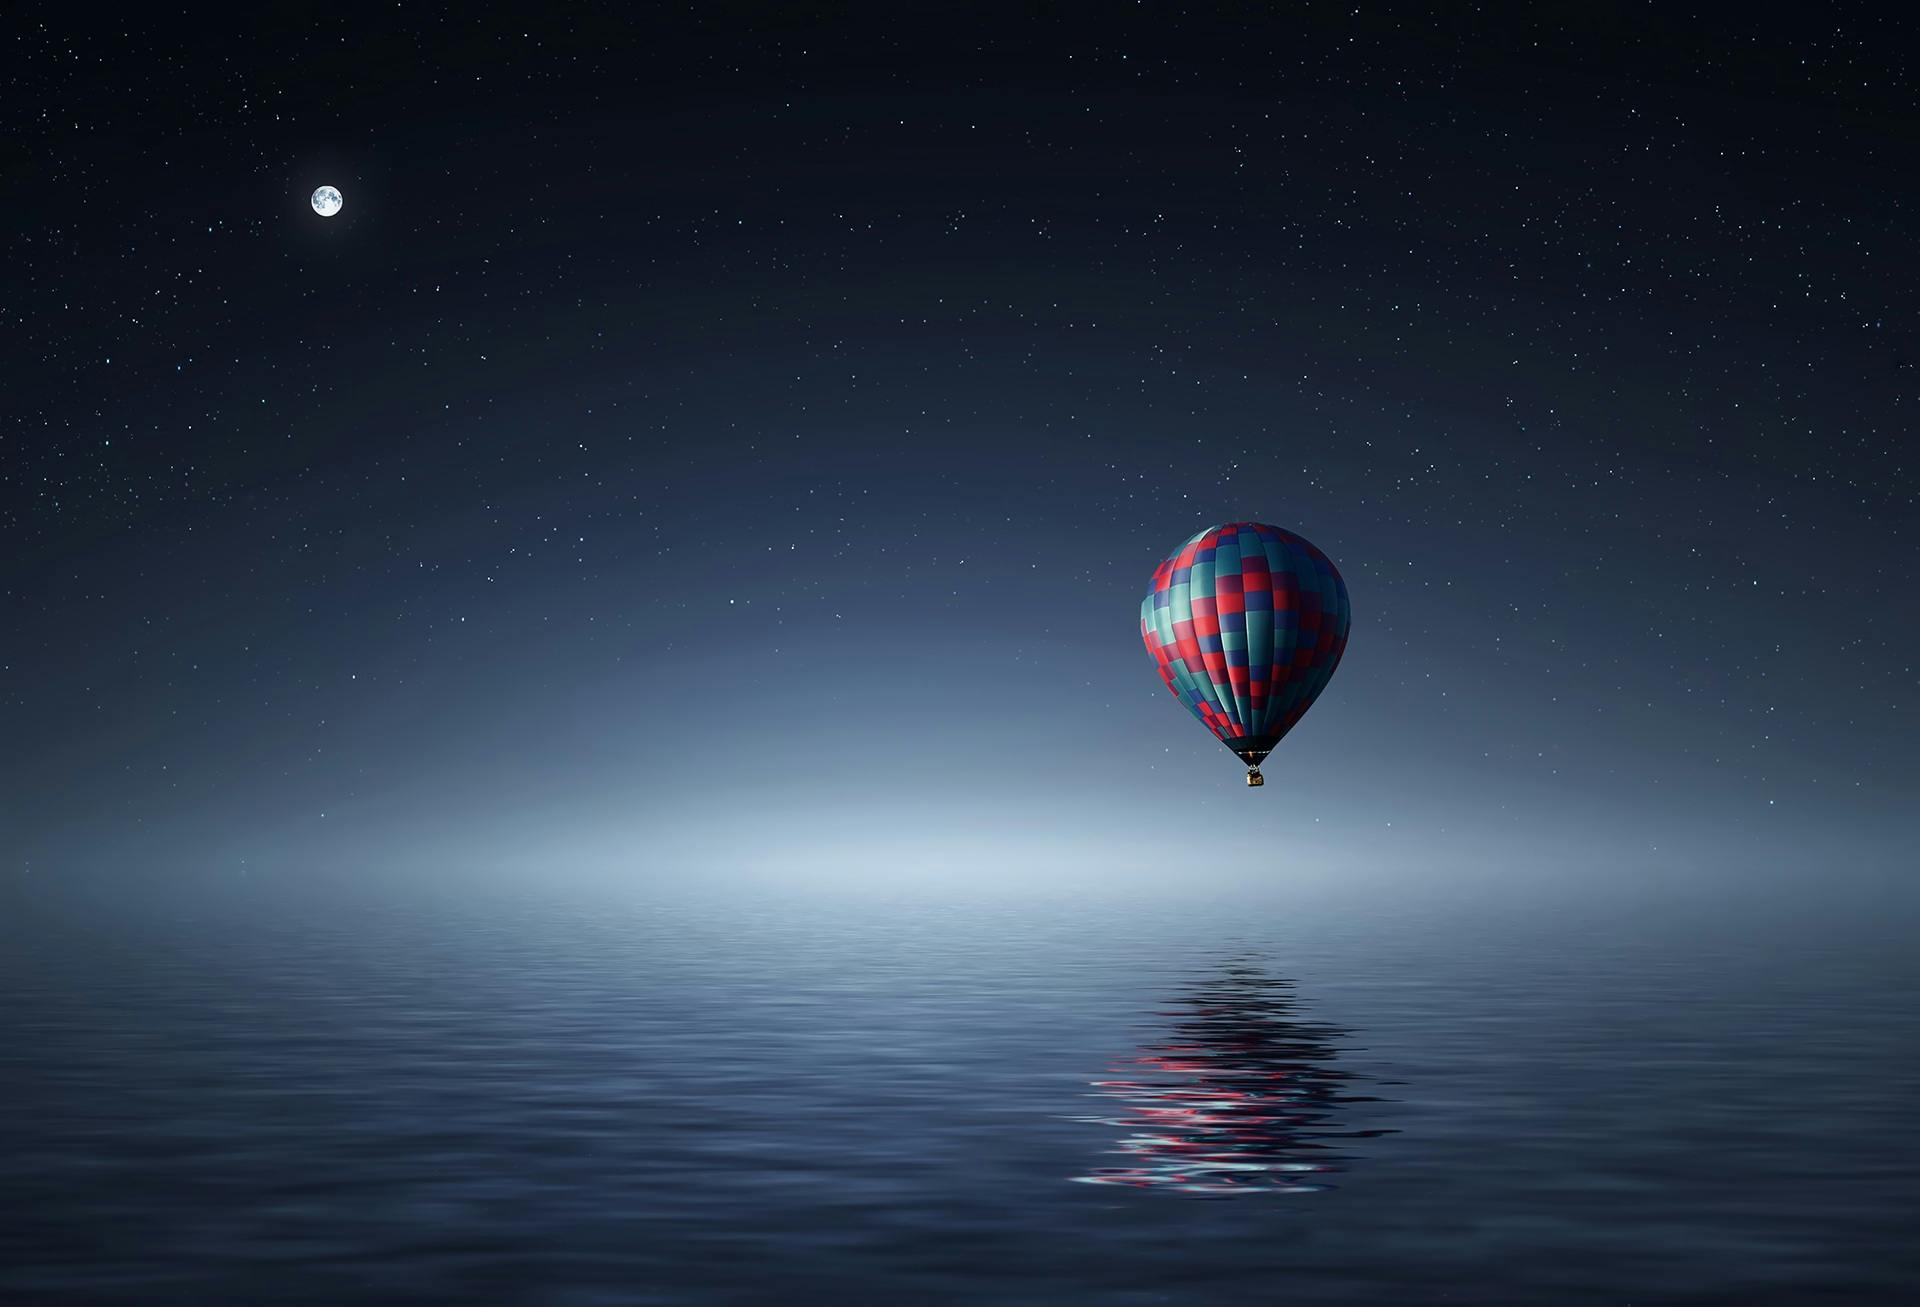 Red And Blue Hot Air Balloon Floating On Air On Body Of